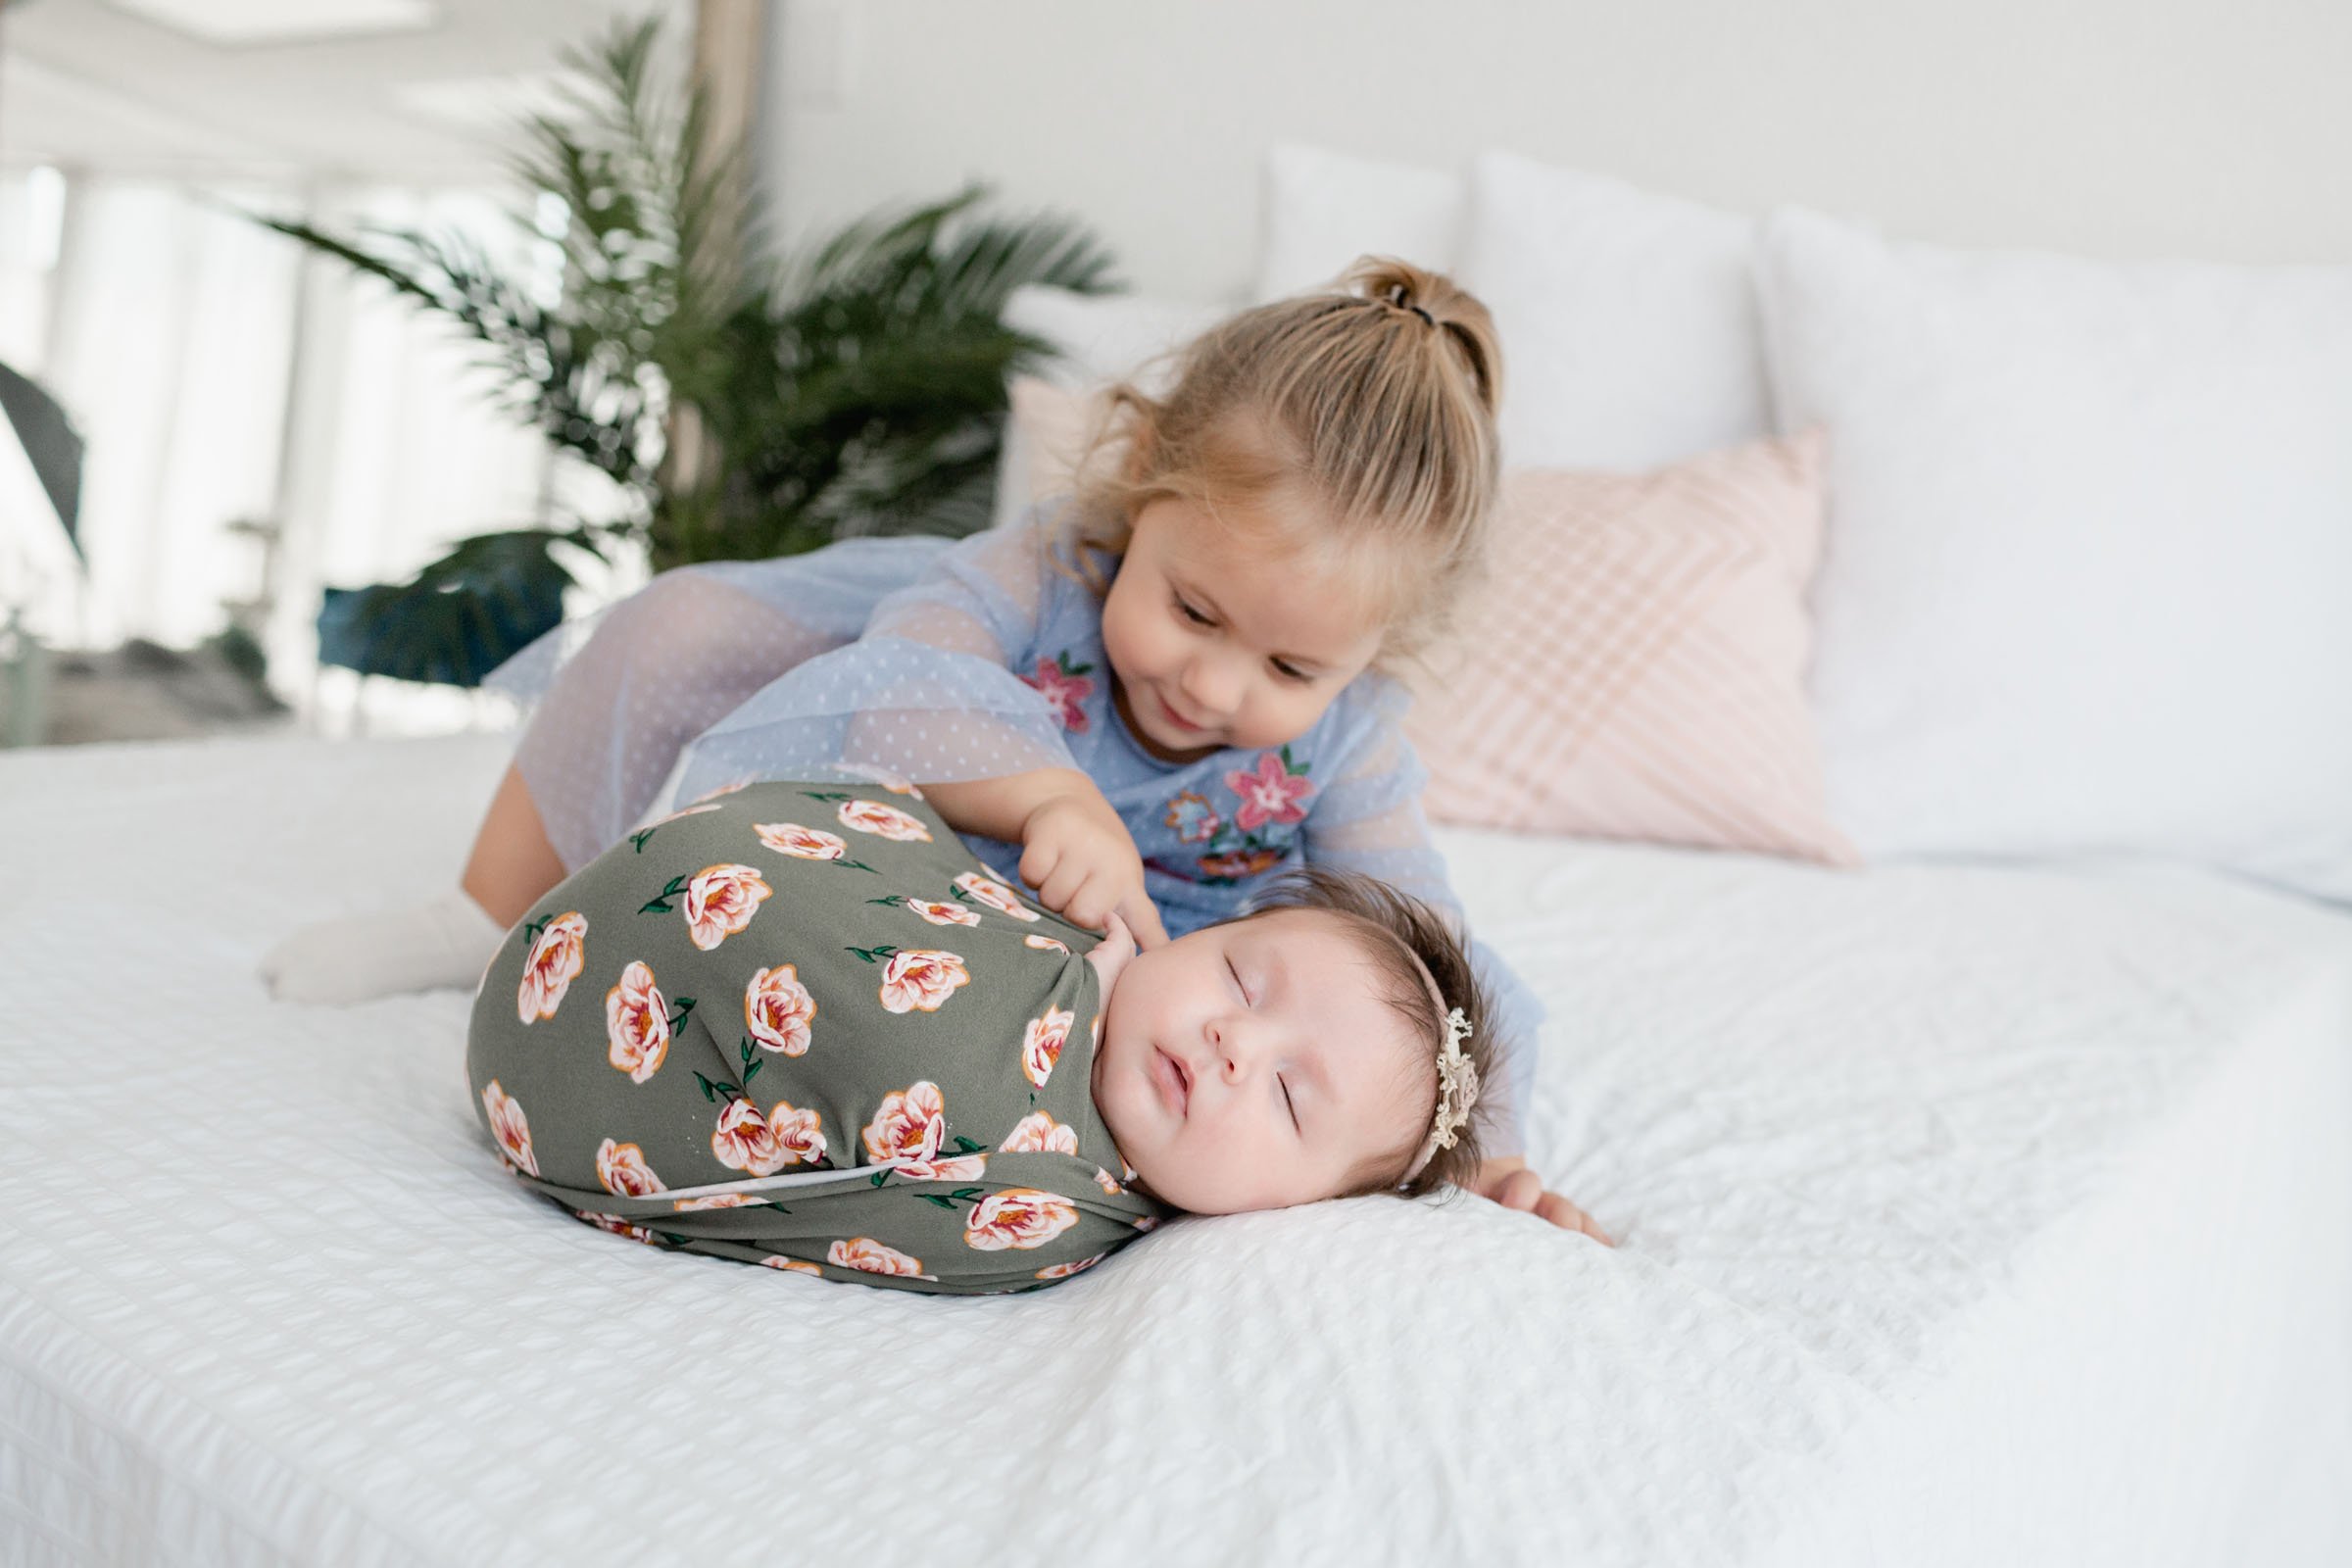 Picture of older sibling poking little sibling on the cheek during newborn pictures by Luxury Newborn Photographer Studio Freyja in San Diego. Big sister is slightly out of focus with newborn sister in focus wrapped up in a flower wrap.